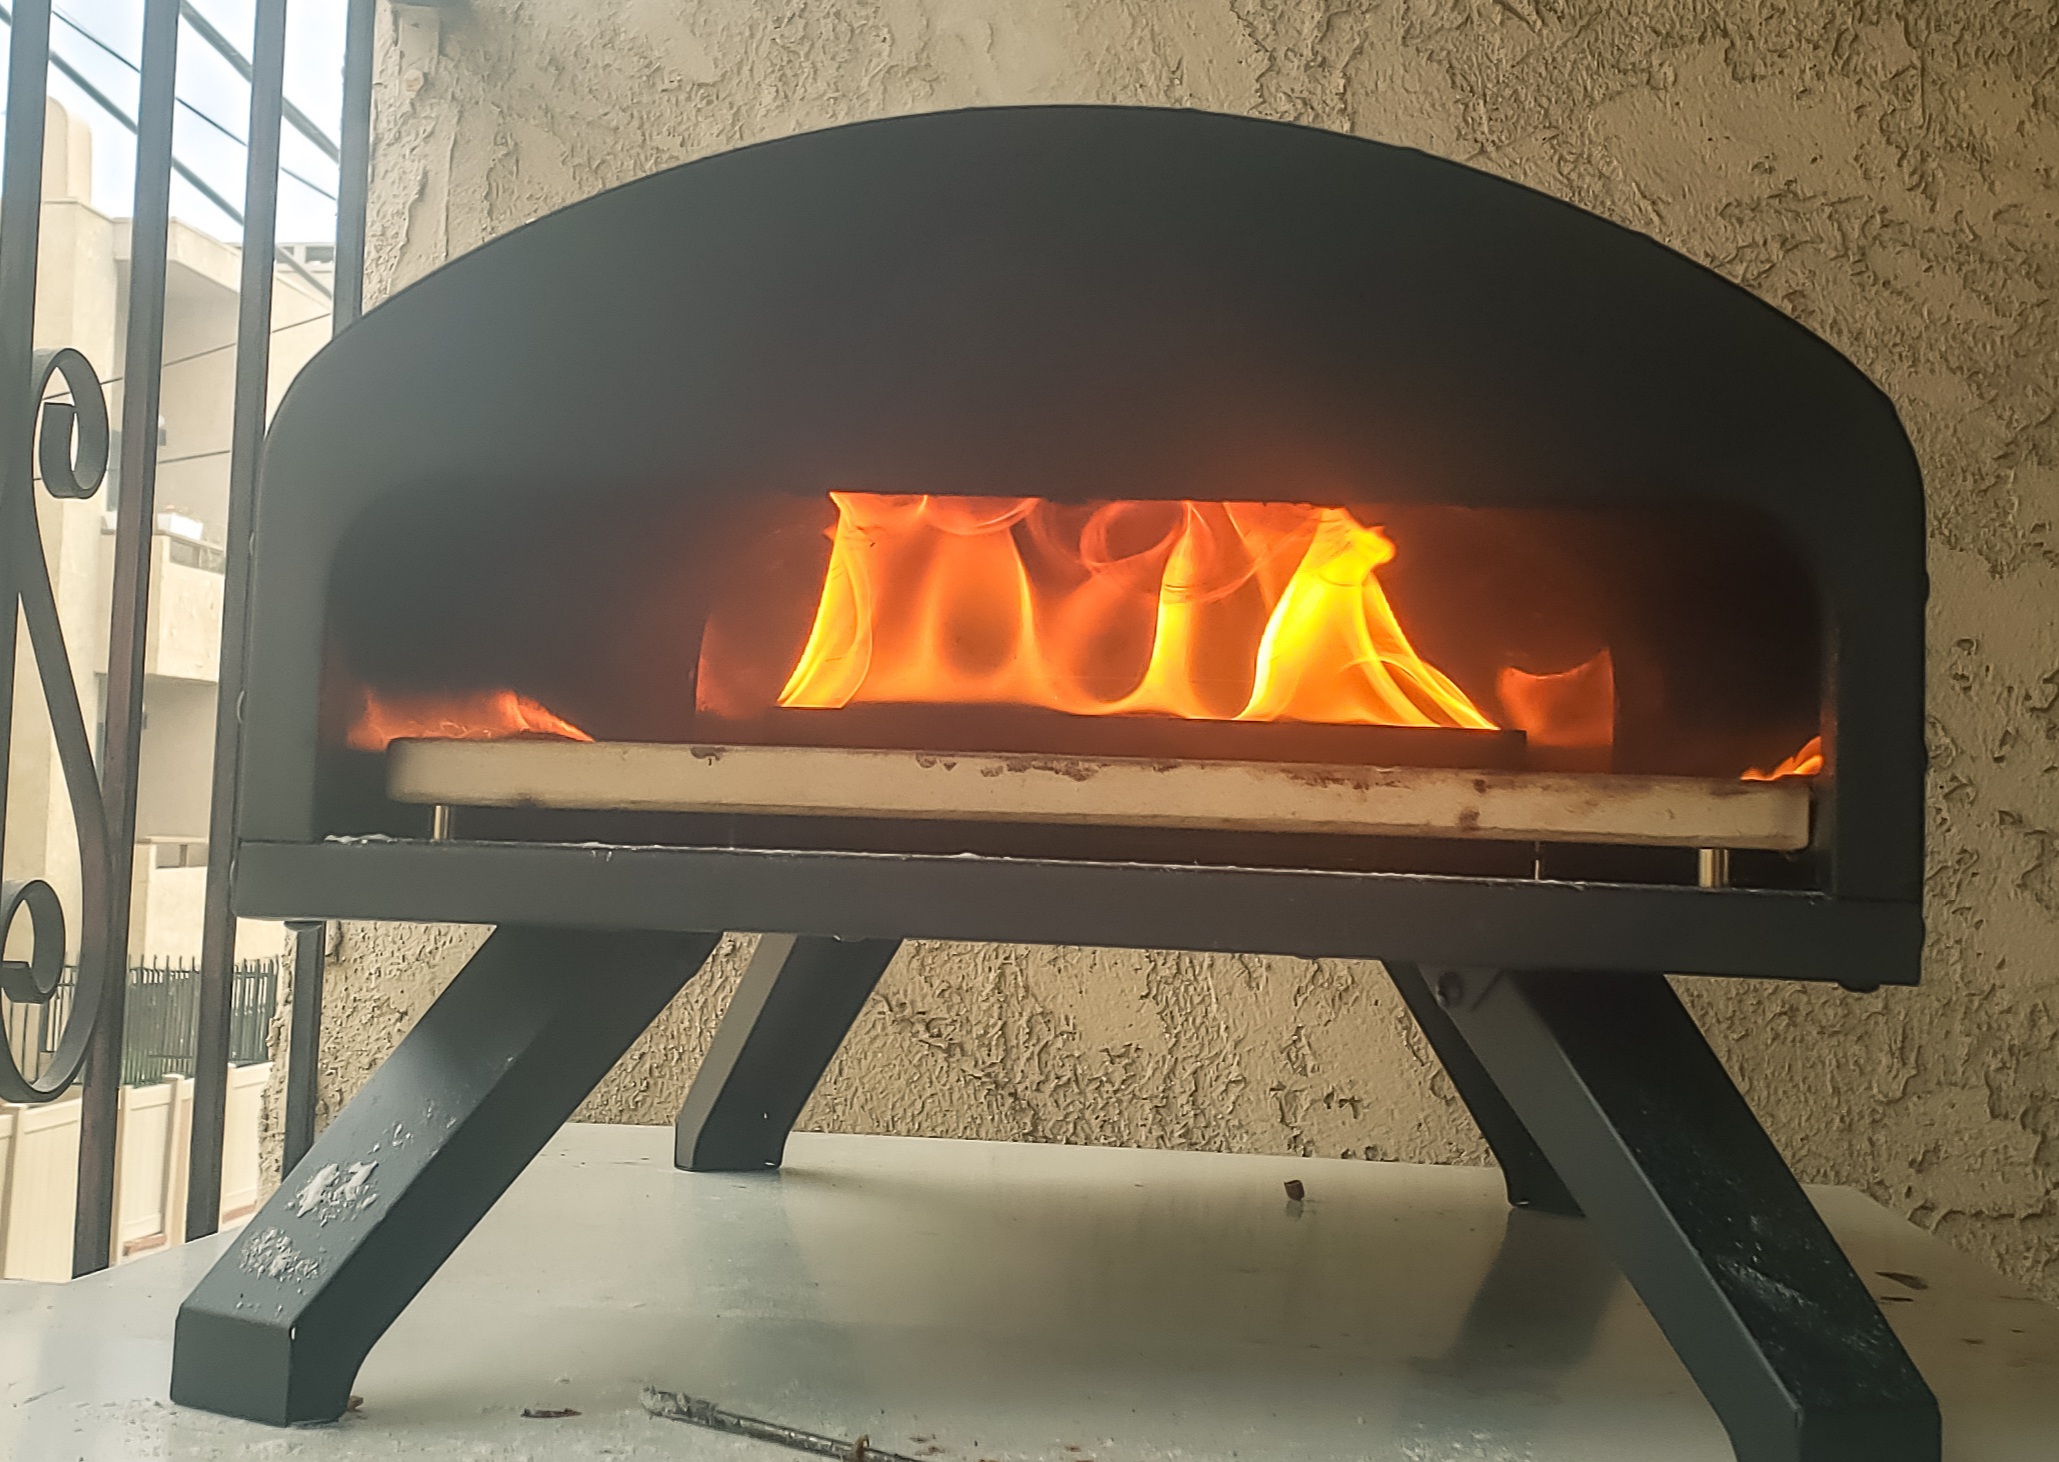 Bertello pizza oven review, wood fired pizza oven